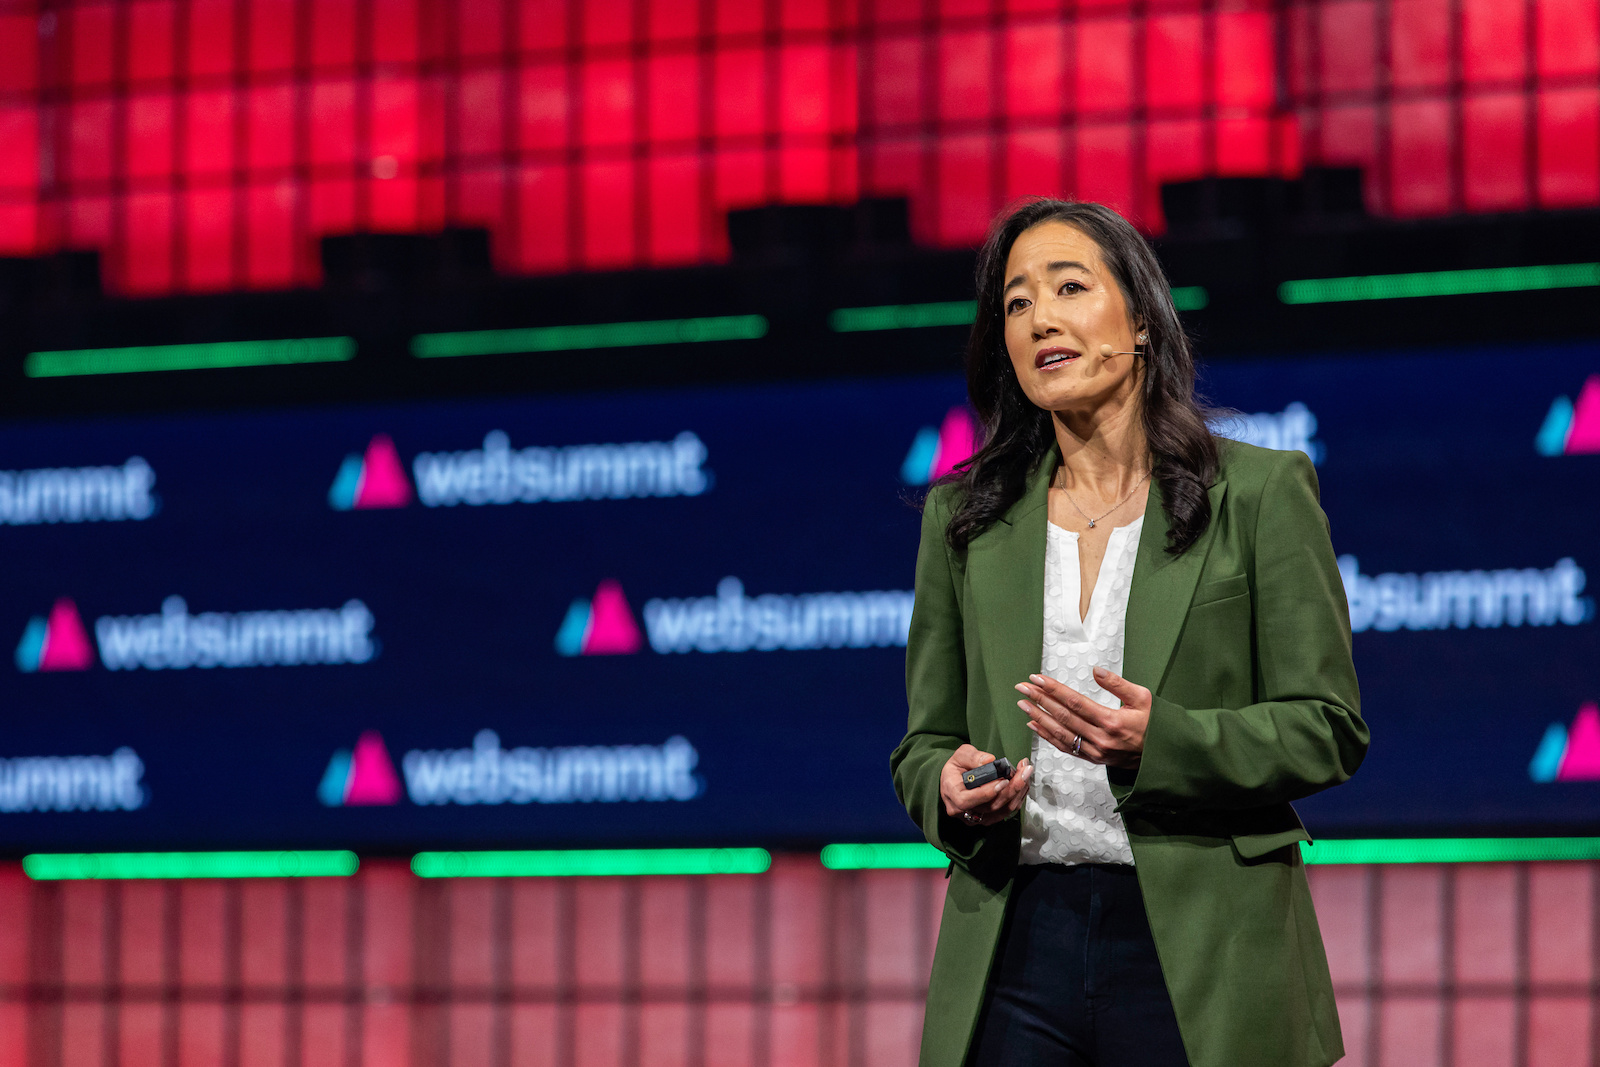 A woma in a blazer talks in front of a large screen with web summit logos